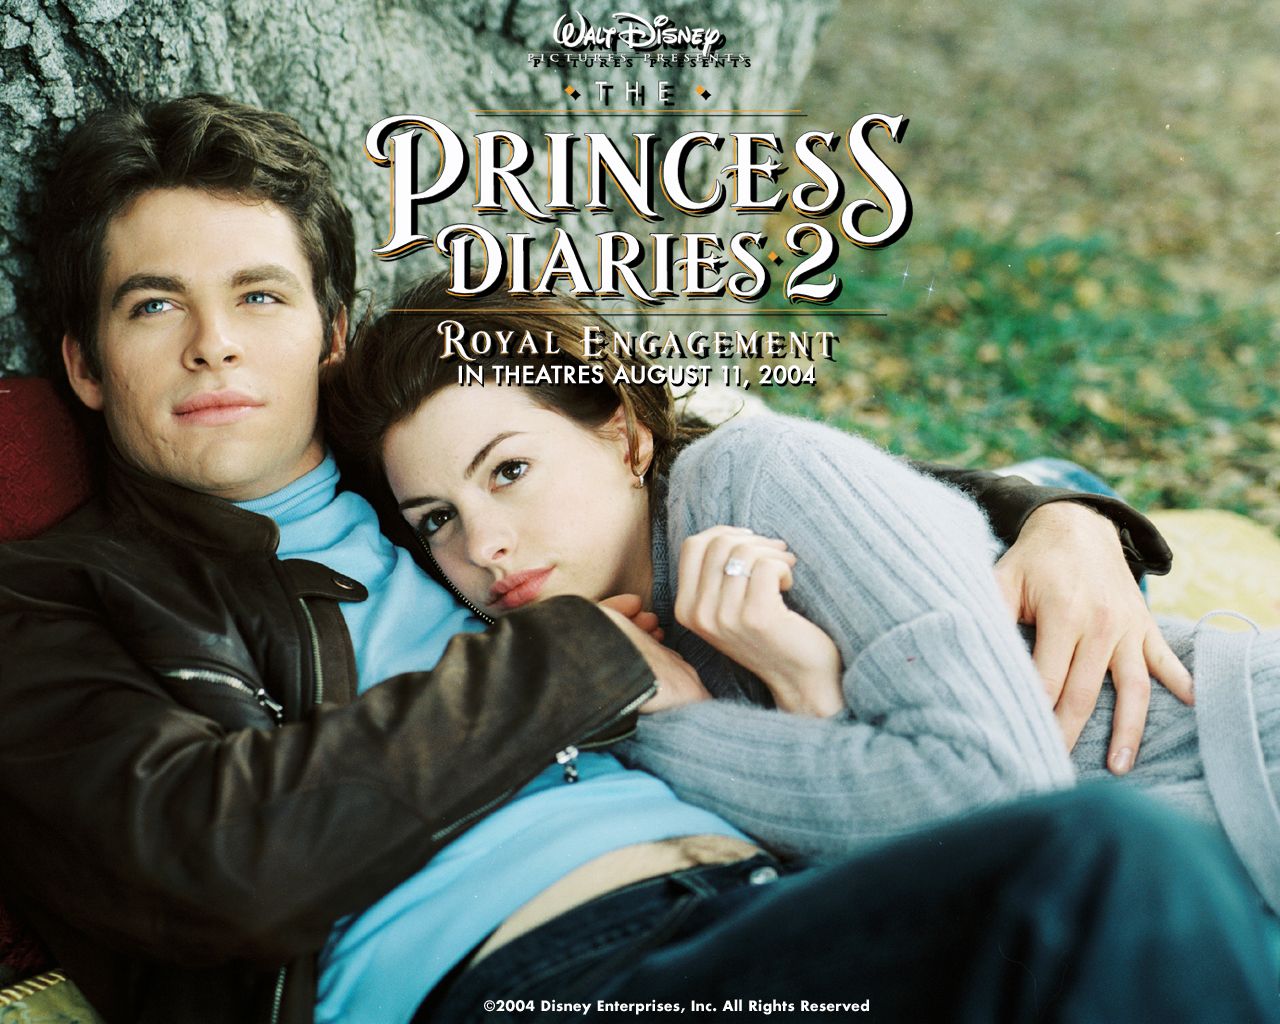 Anne_Hathaway_in_The_Princess_Diaries_2_Royal_Engagement_top romantic movies